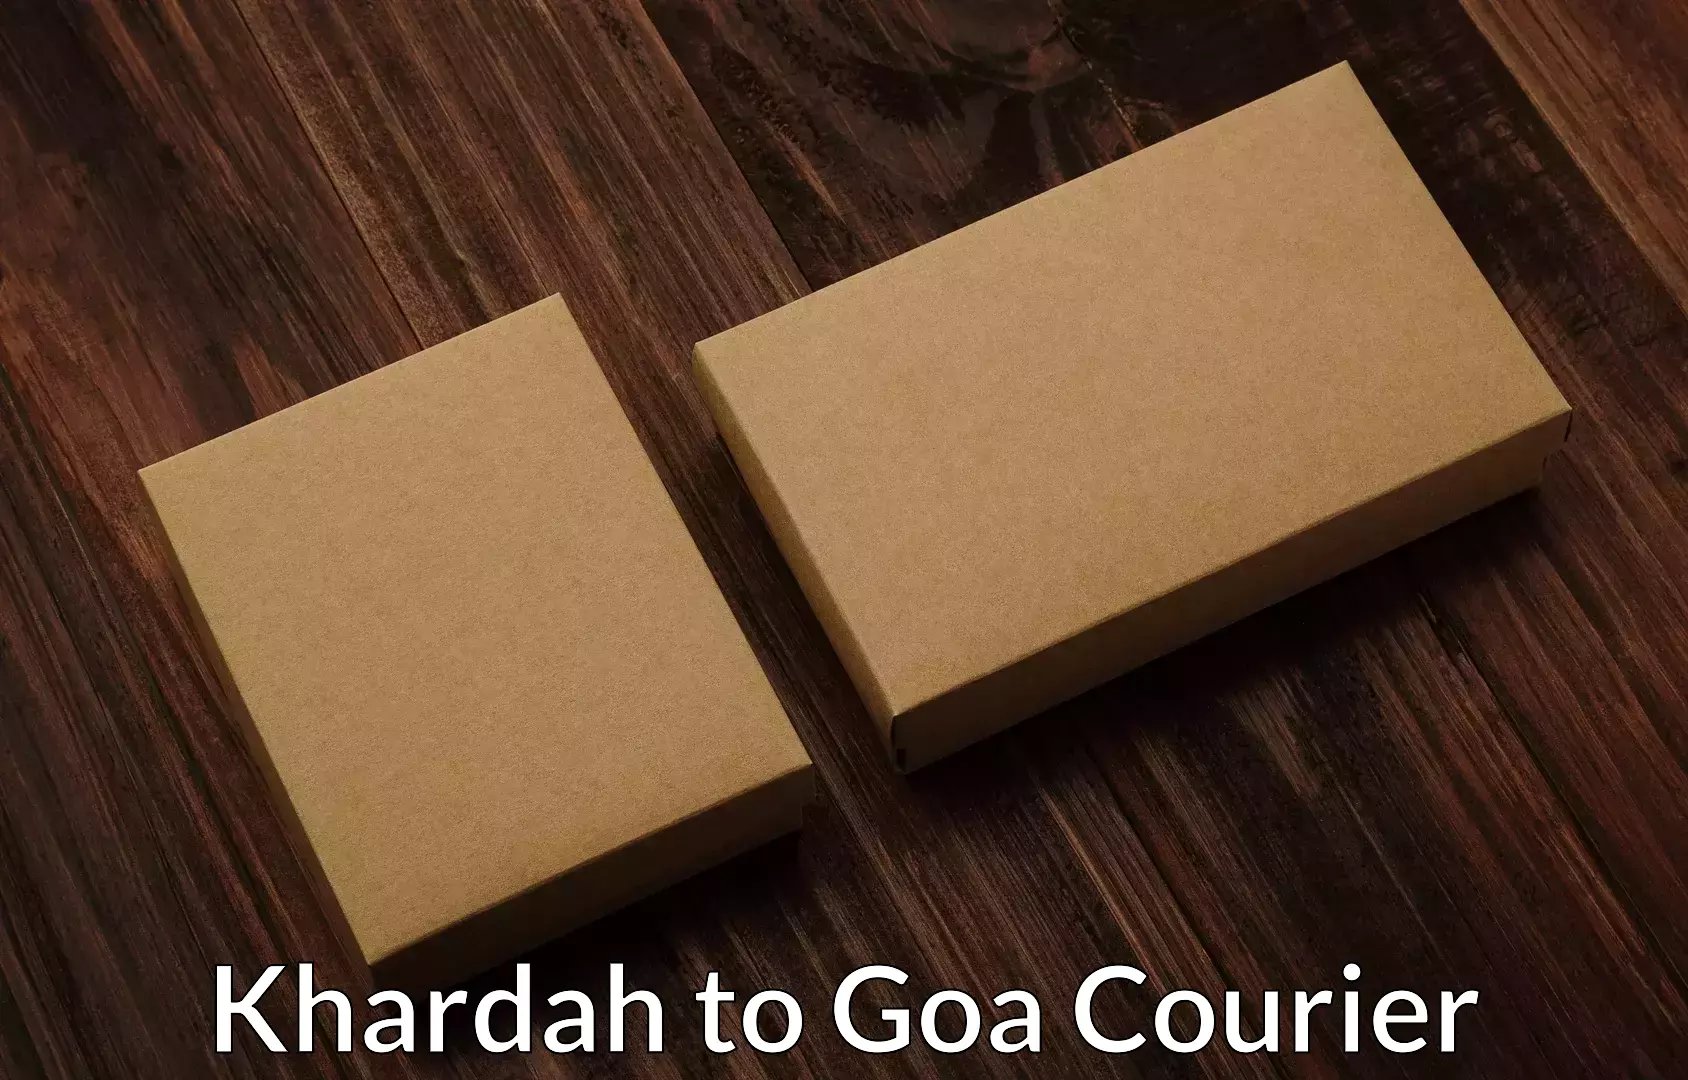 Home moving specialists Khardah to Goa